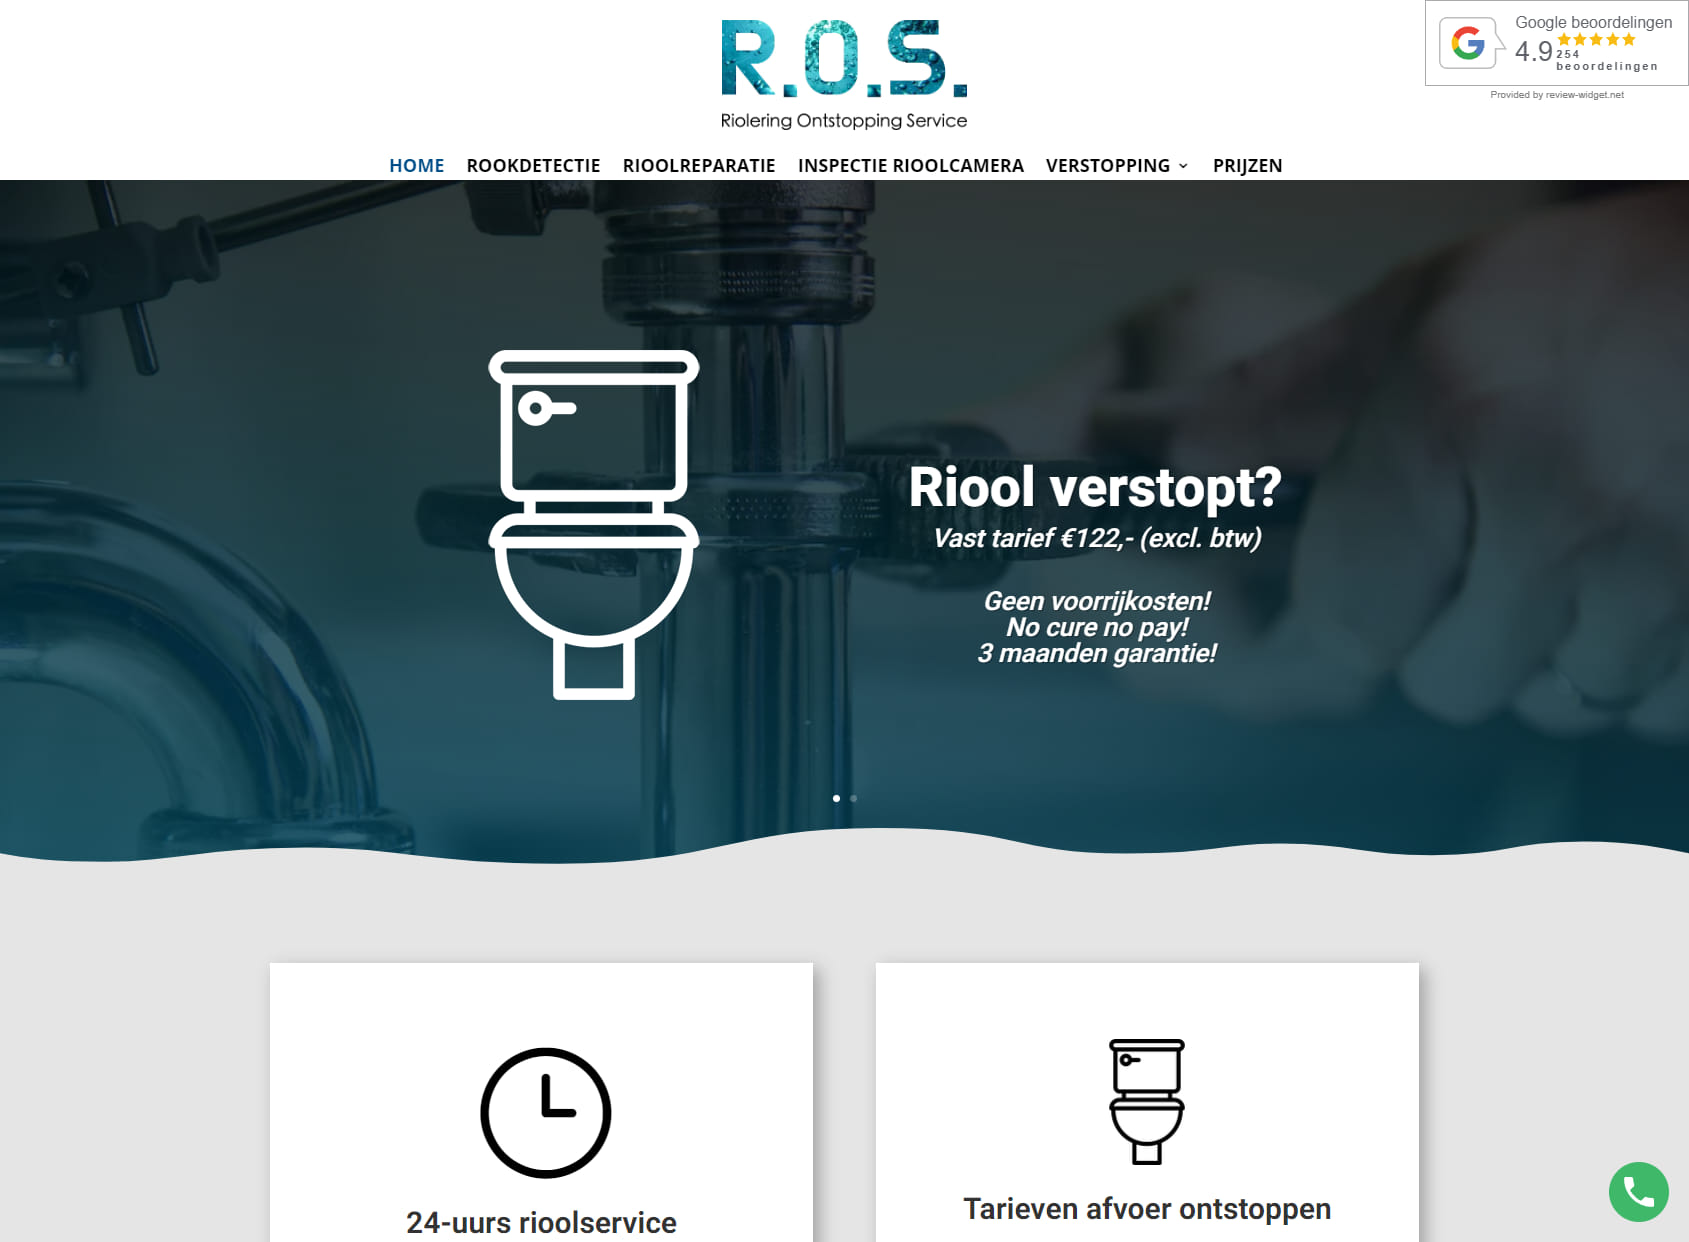 Riolering Ontstopping Service ROS